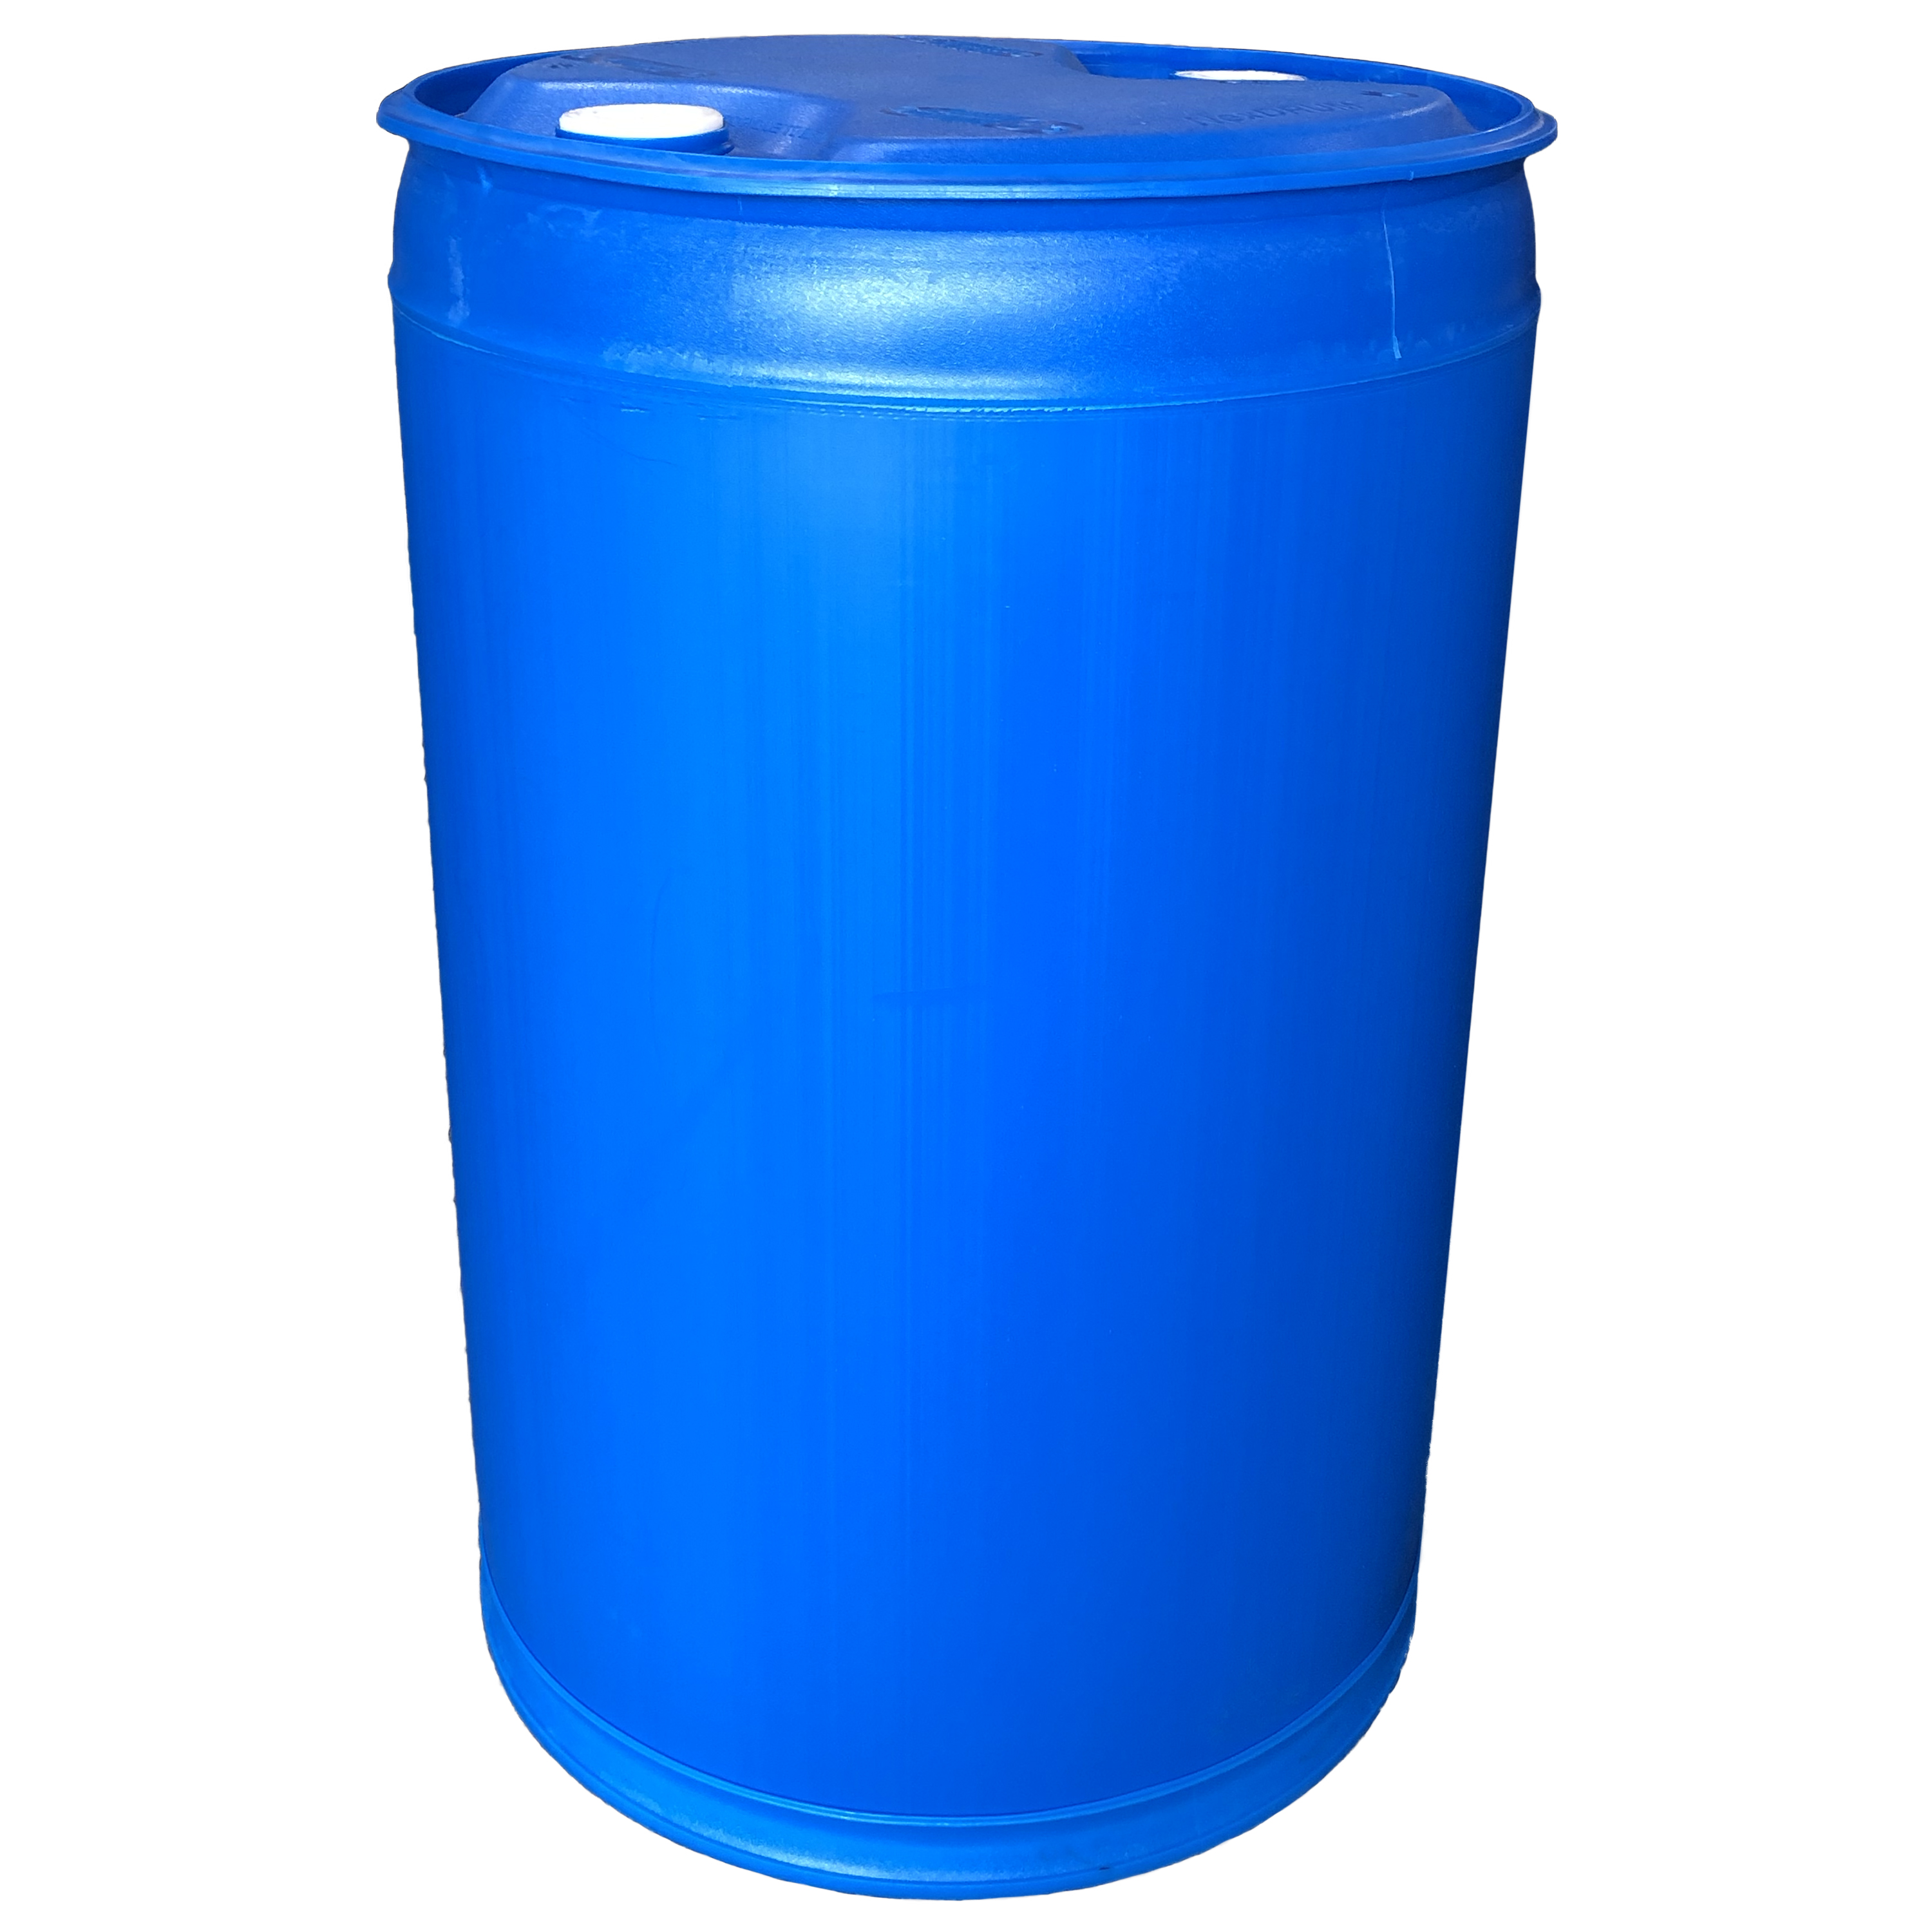 Augason Farms Water Treatment and Storage Kit, 55-gallon Water Drum - image 5 of 7